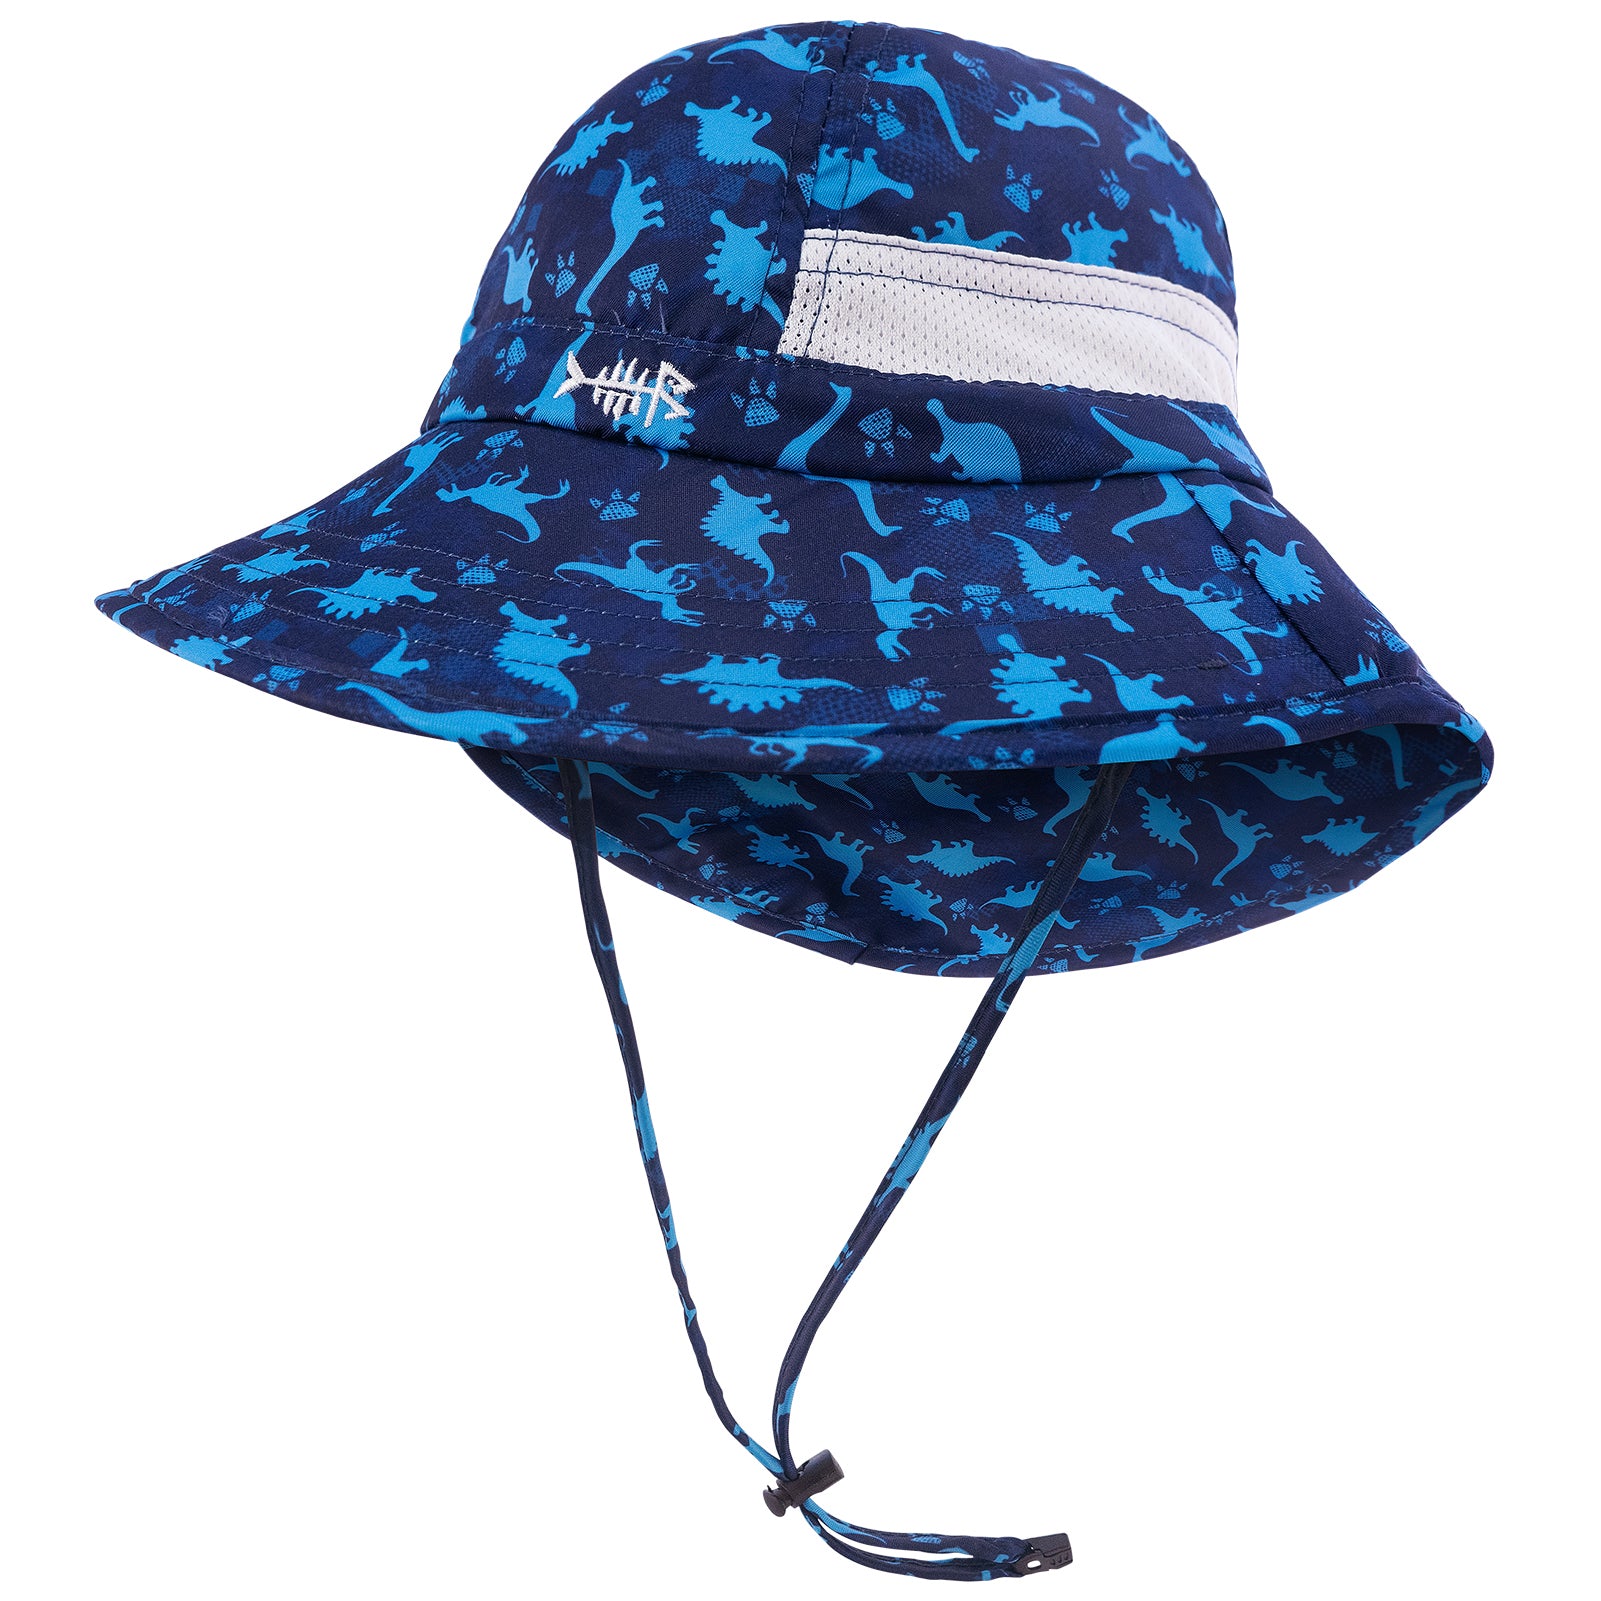 Bassdash Foldable UPF 50+ Fishing Hats with Removable Neck Flap Fh12, Dark Blue with Unfoldable Brim / One Size